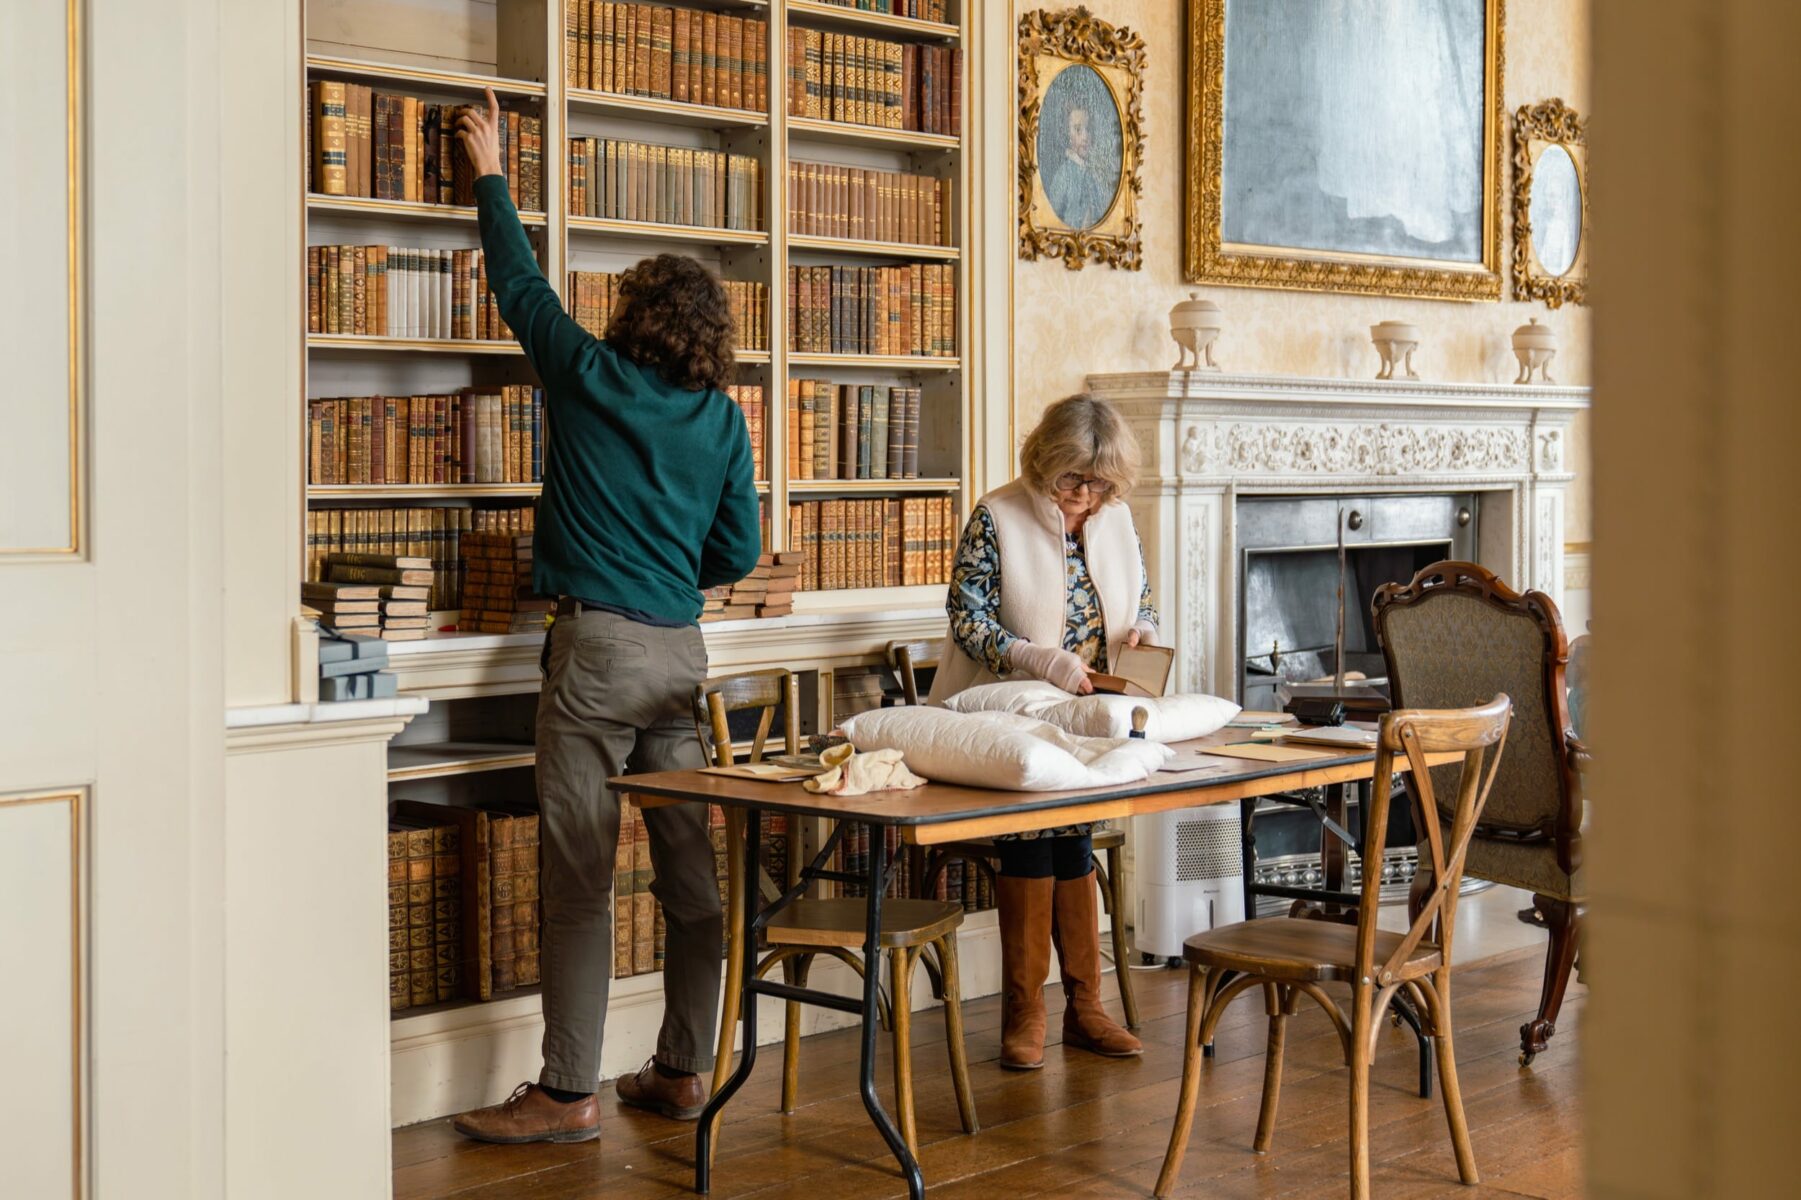 A man removes books from a shelf whilst a woman inspects them on a table in a library at Powderham Castle